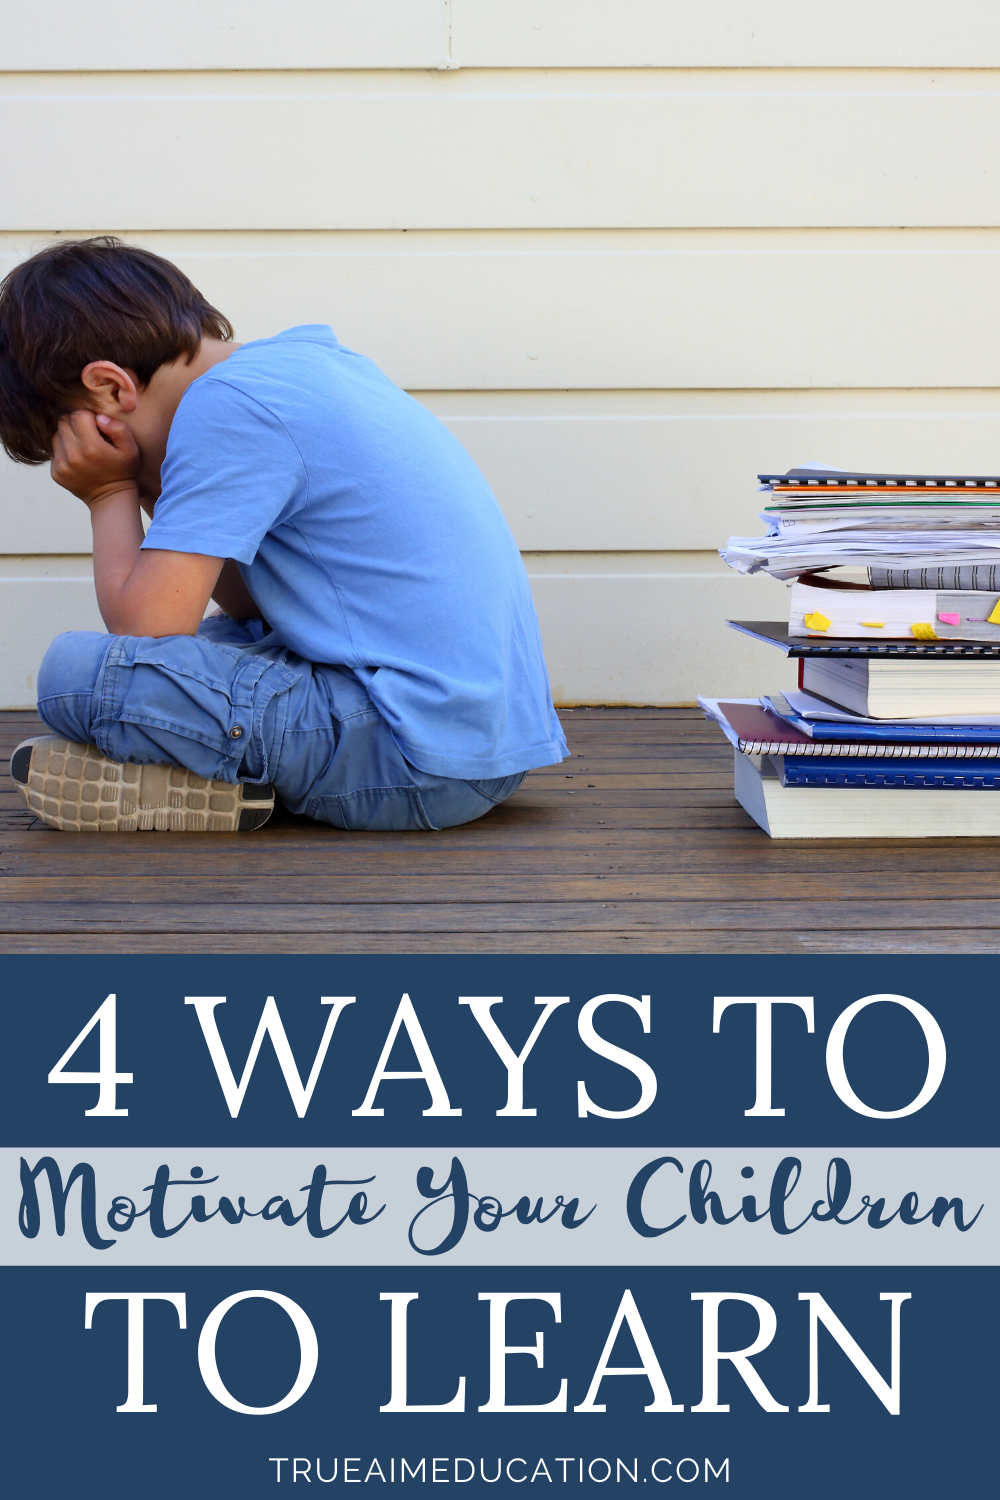 4 Ways to Motivate Your Children to Learn